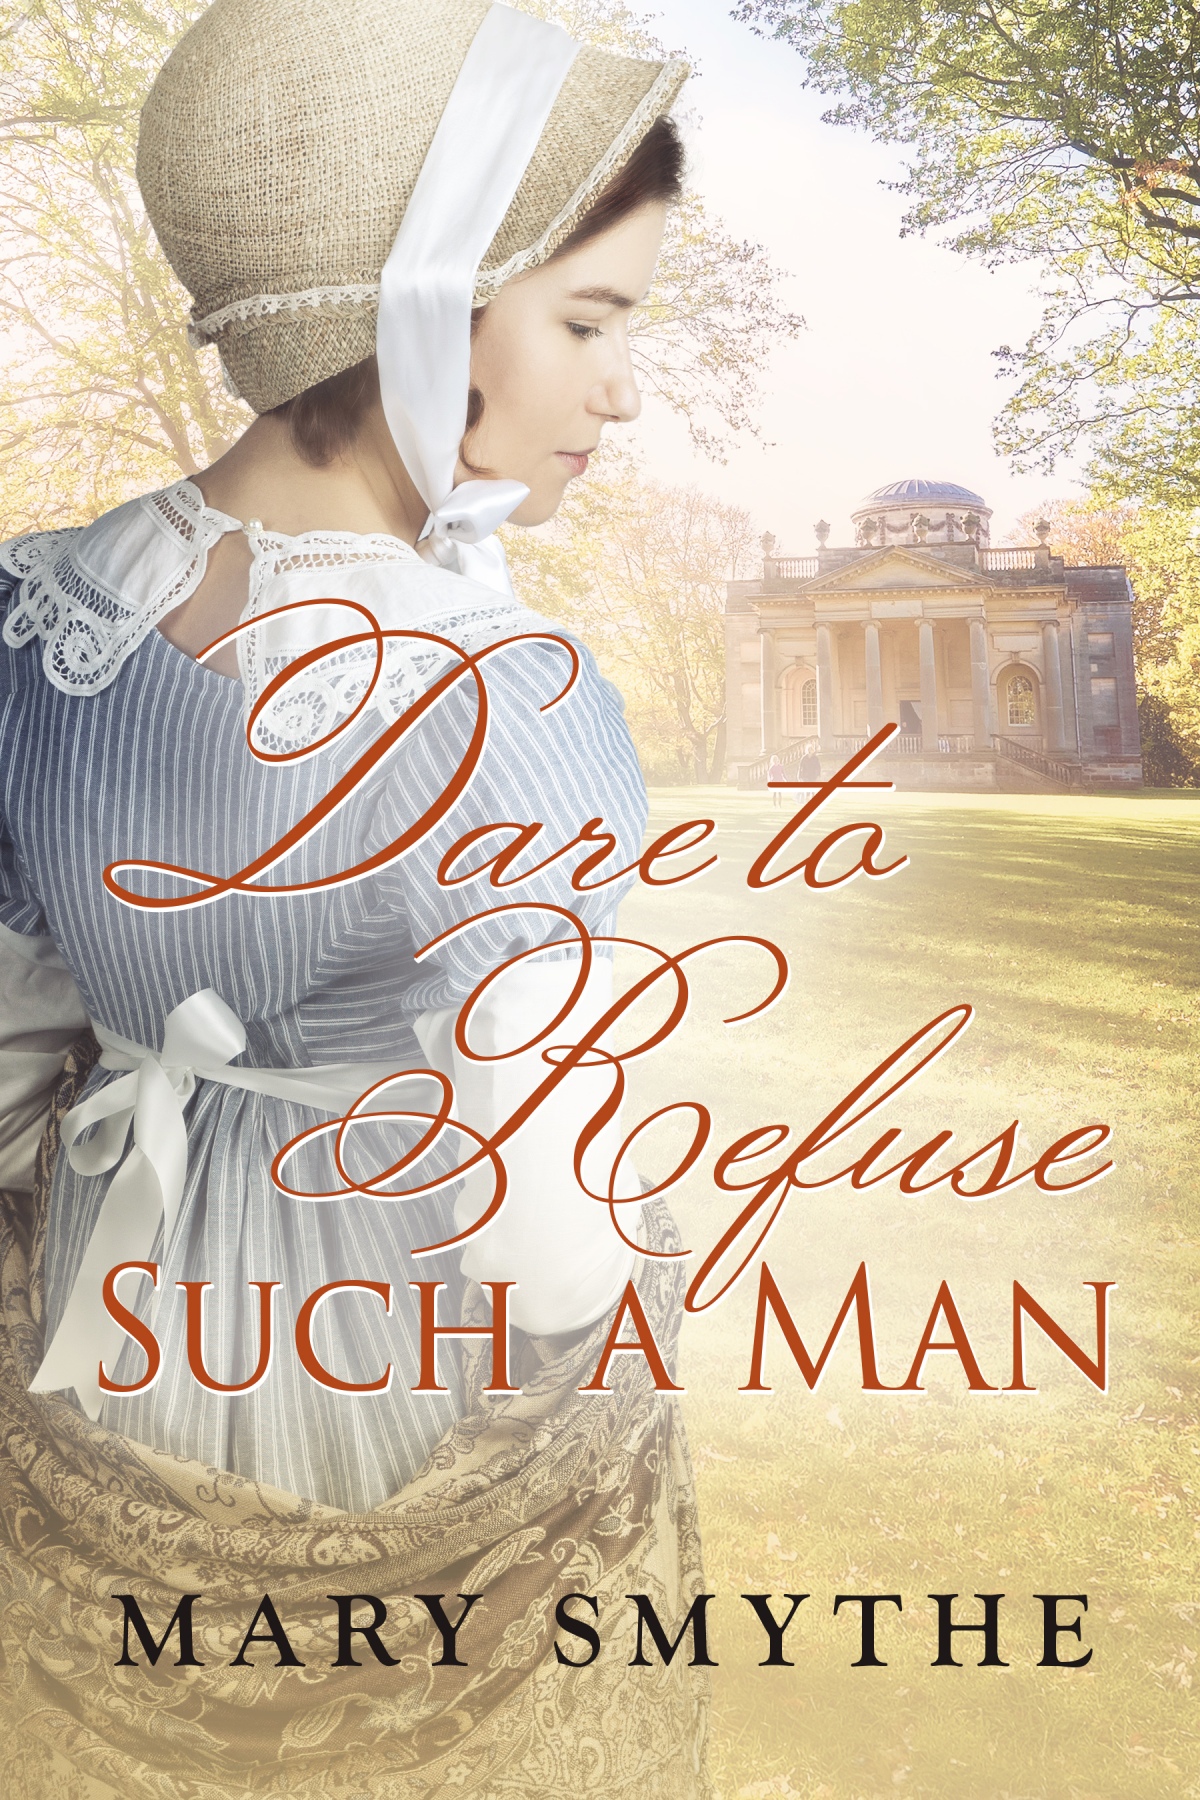 “Dare to Refuse such a Man” by Mary Smythe, review, deleted scene + giveaway